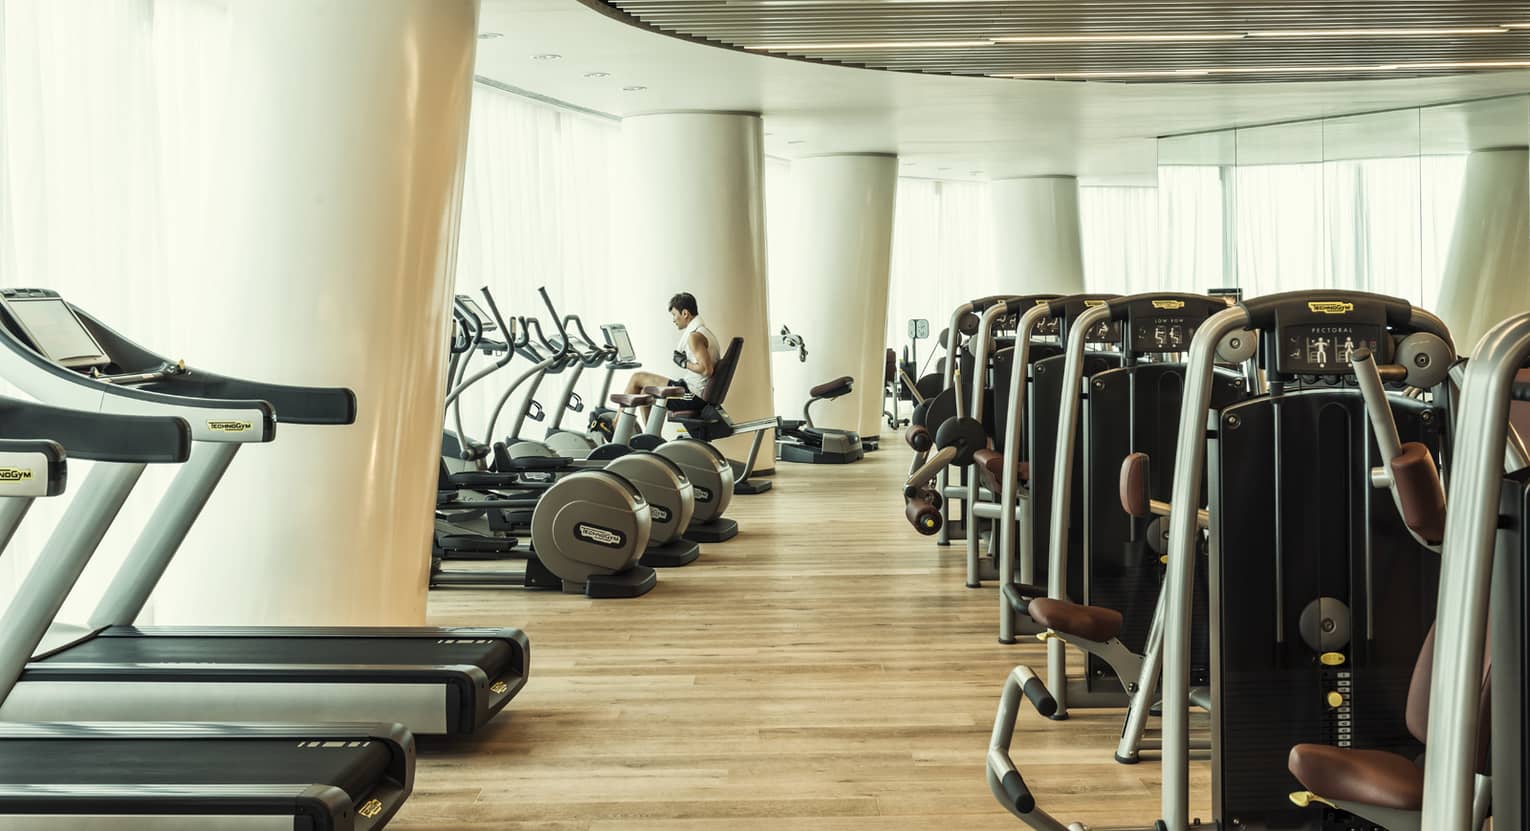 Cardio machines in bright fitness room with modern white pillars, man on bicycle machine